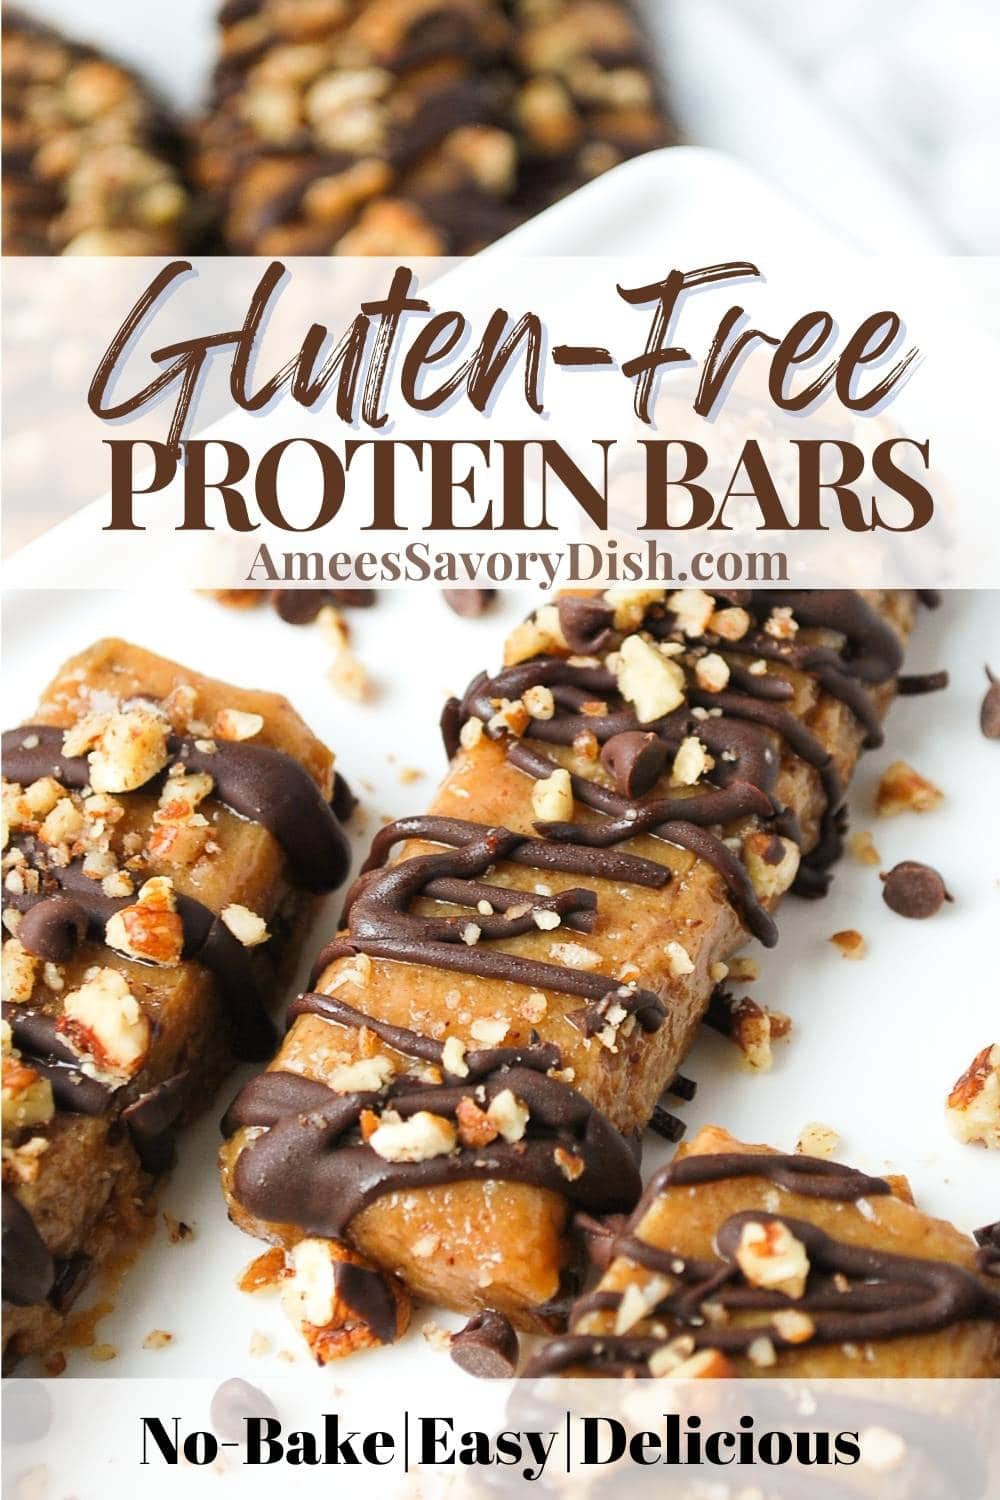 These delicious no-bake peanut butter protein bars are gluten-free, sweetened with natural ingredients, and easy to make! via @Ameessavorydish